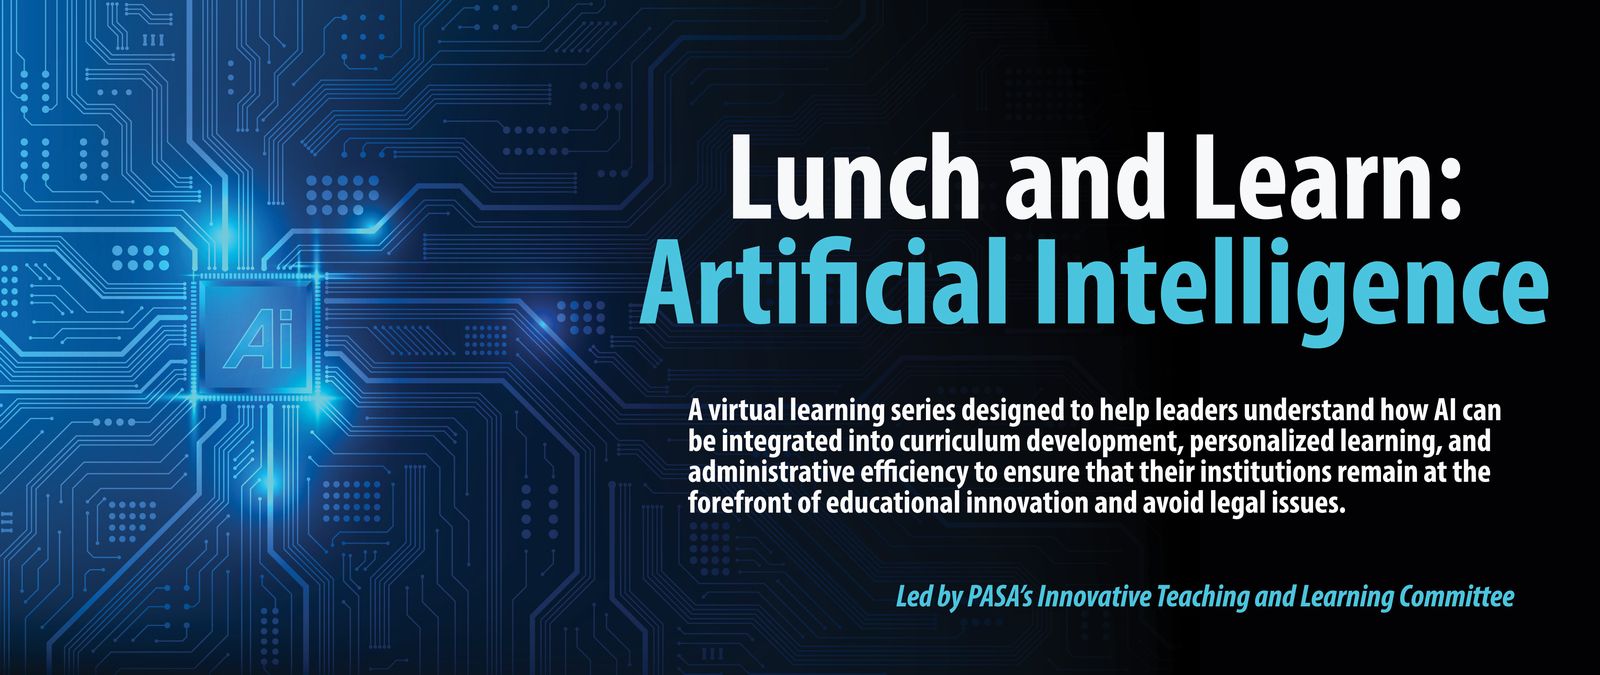 lunch-and-learn-artifcial-intelligence-2024.jpg